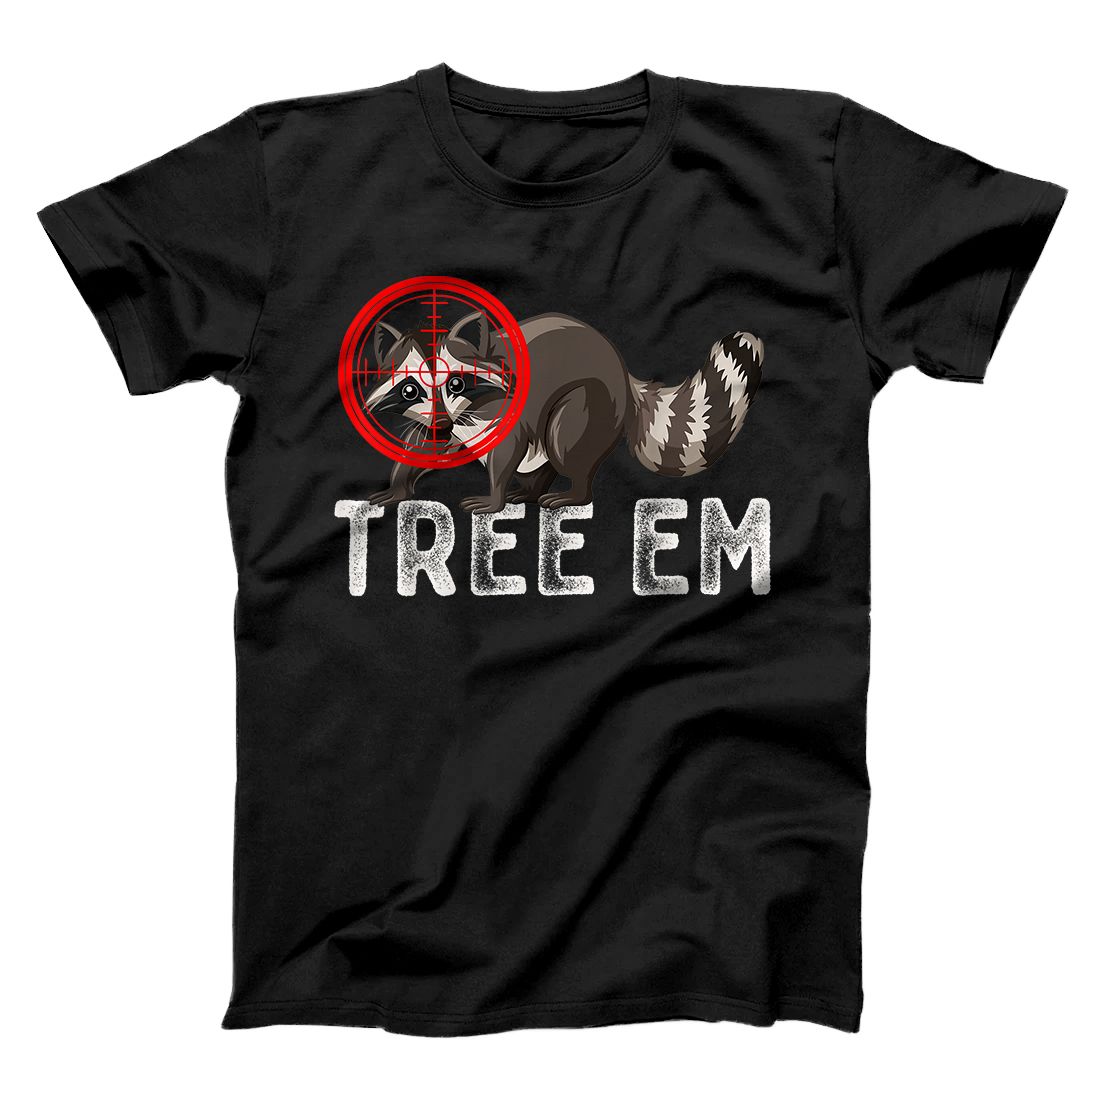 Personalized Coon Hunting Tree Em Funny Vintage Raccon Hunting Gear or Gi T-Shirt